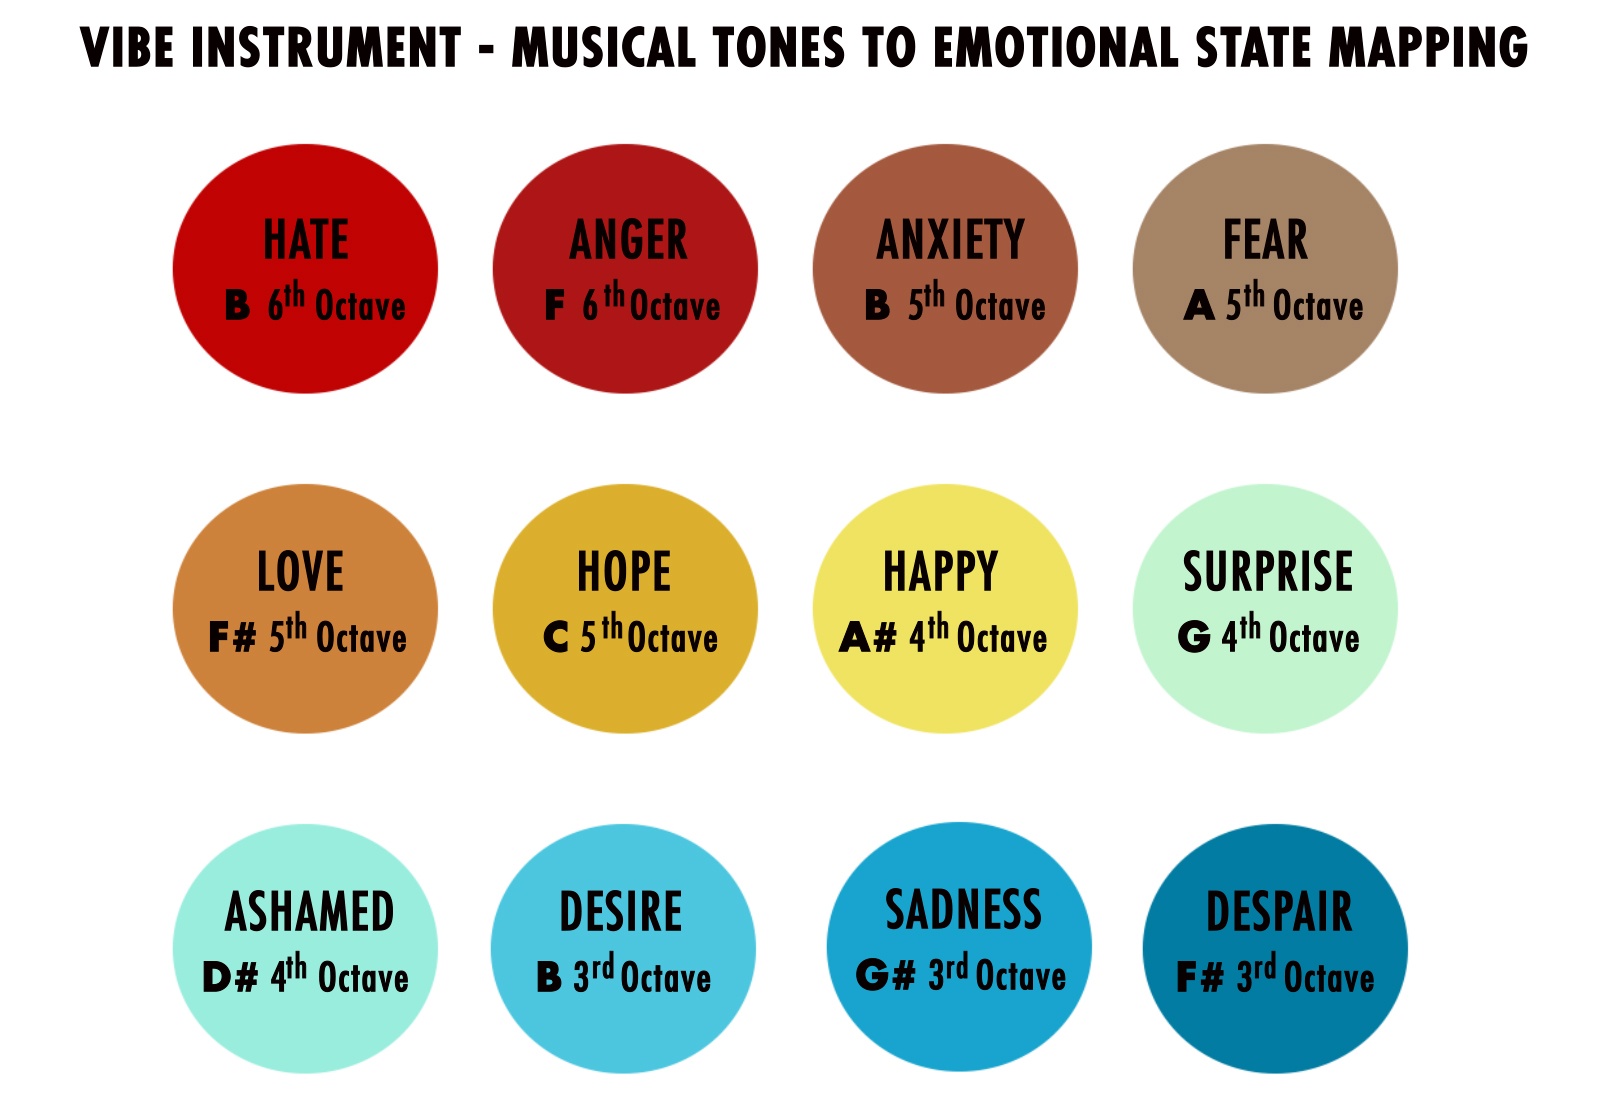 vibe-emotional_musical-mapping-1